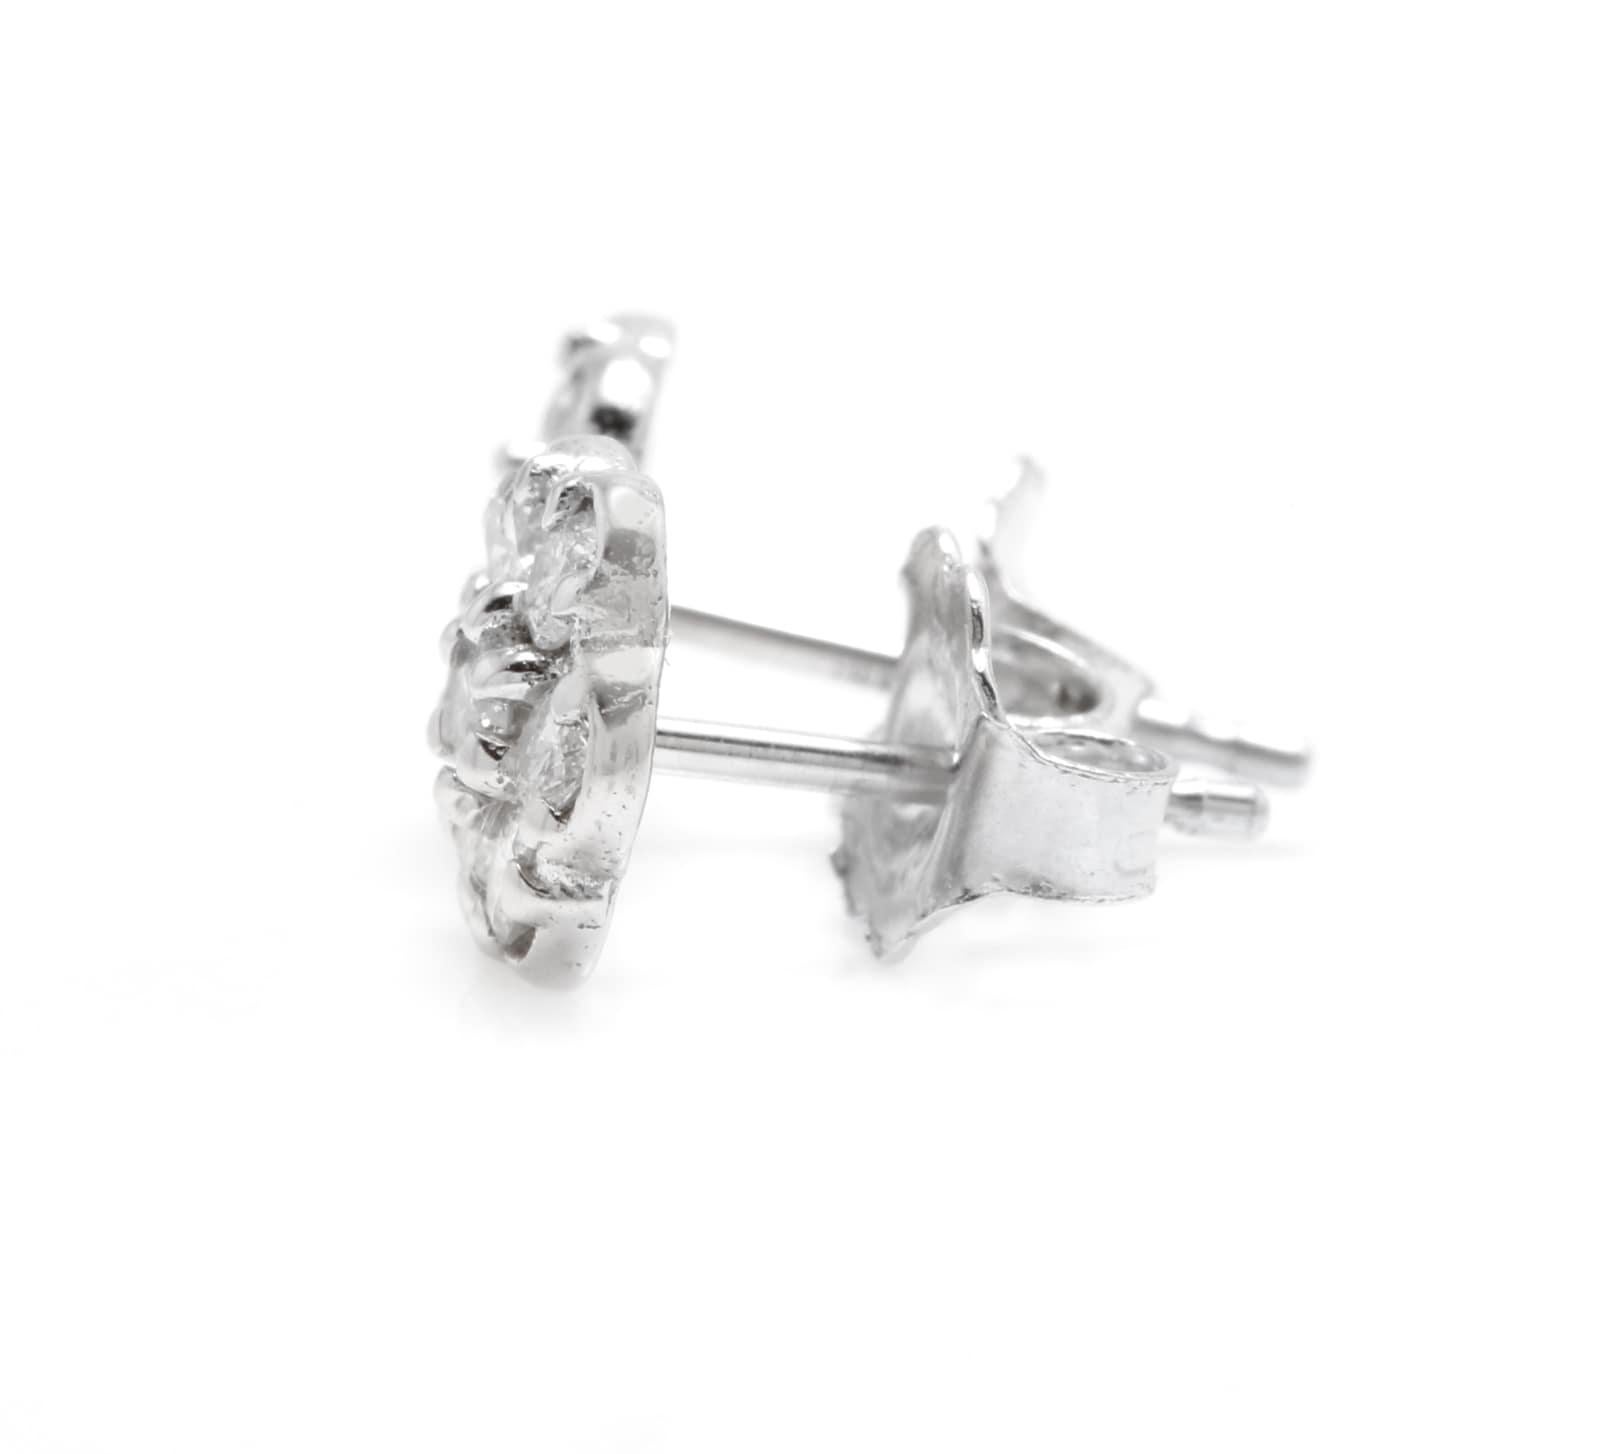 Exquisite 0.45 Carats Natural Diamond 14K Solid White Gold Stud Earrings

Amazing looking piece!

Total Natural Round Cut Diamonds Weight: Approx. 0.45 Carats (both earrings) SI1-SI2 / G-H

Diameter of the Earring is: 6.7mm

Total Earrings Weight